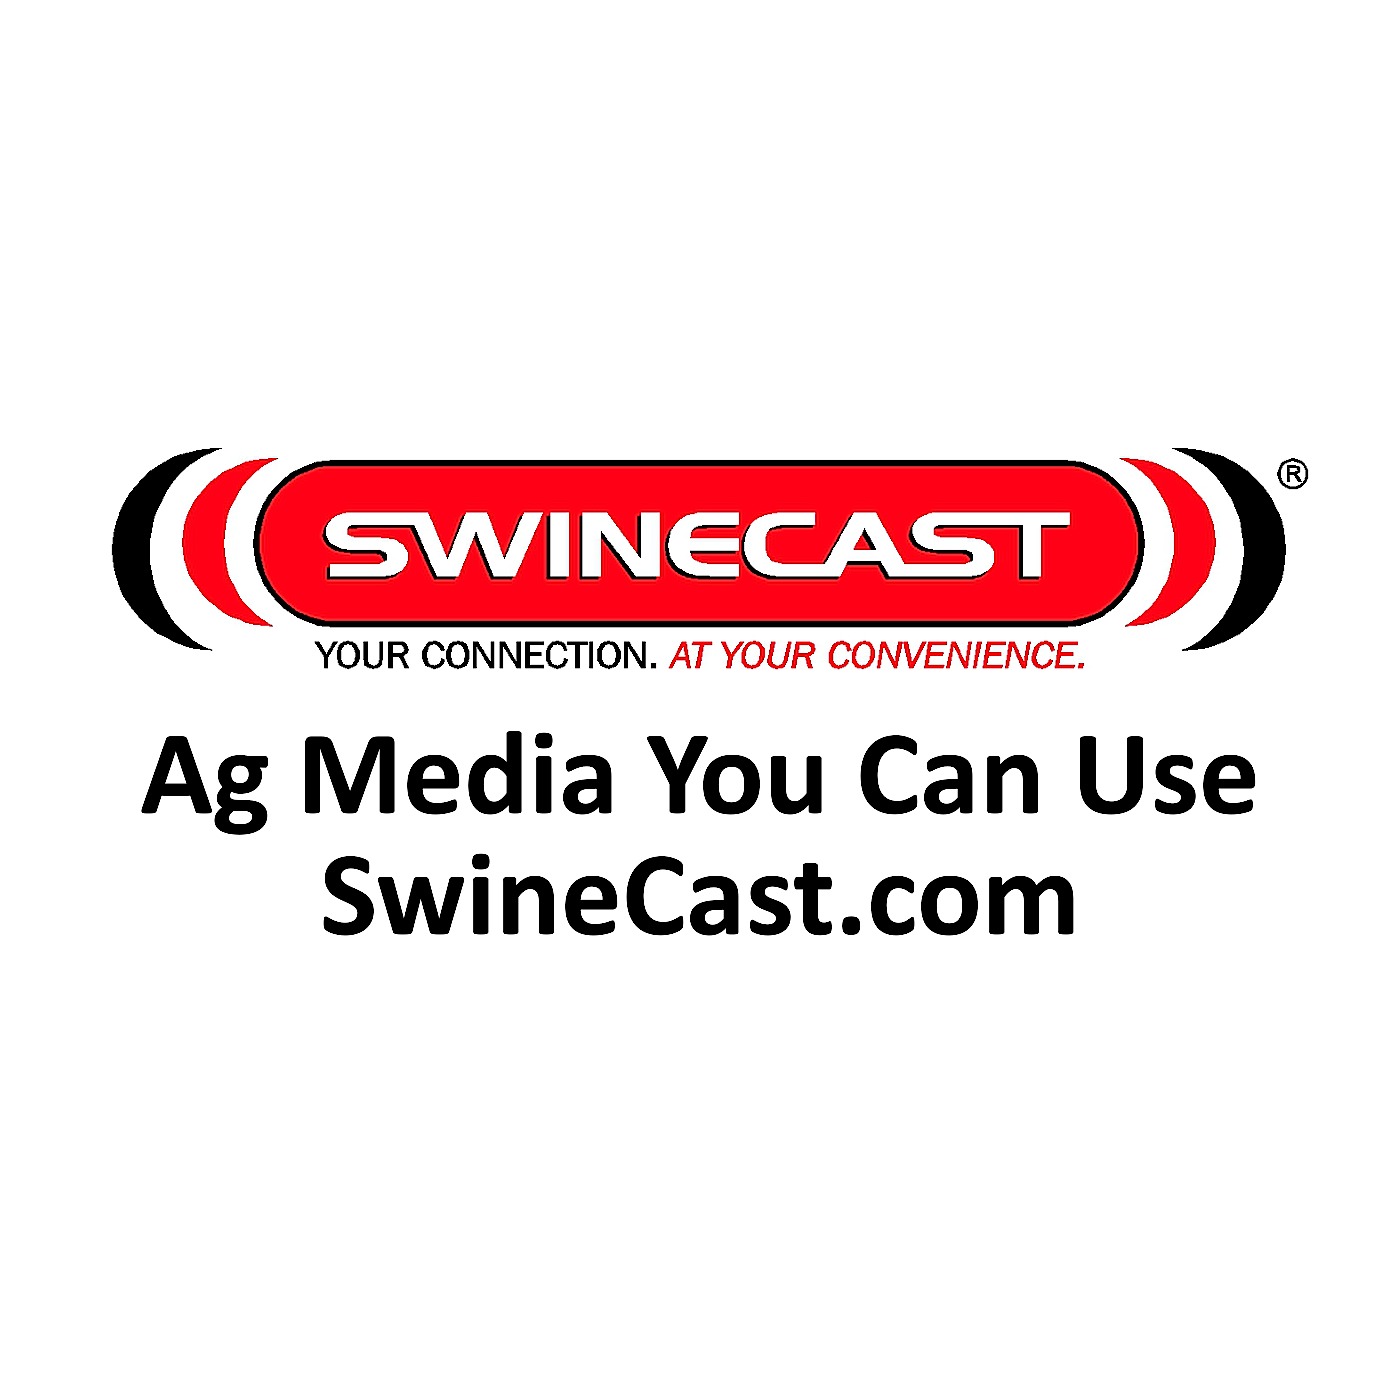 SwineCast. Your Connection. At Your Convenience.